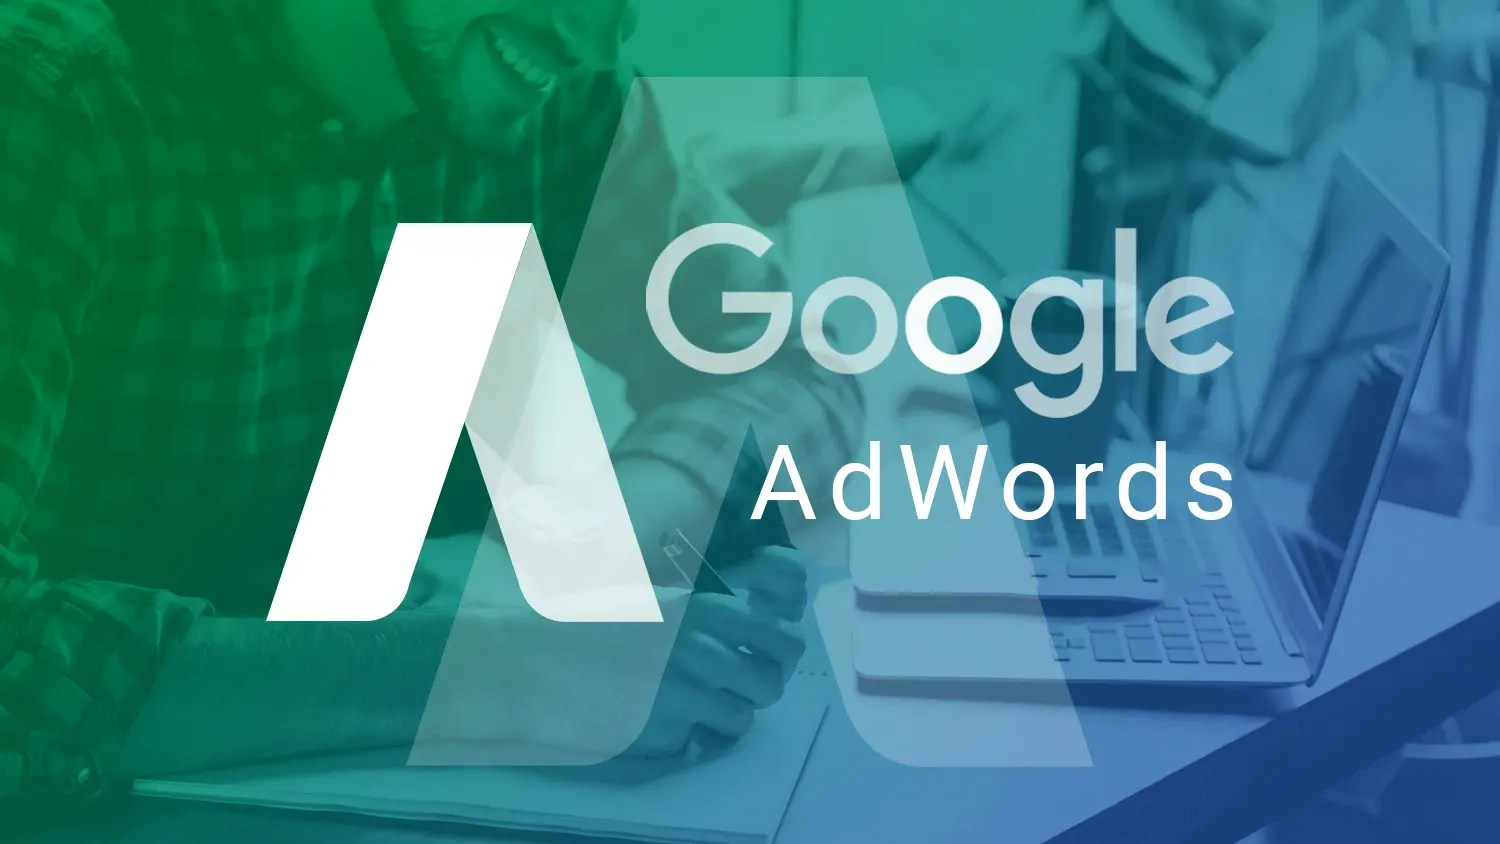 adwords manager account